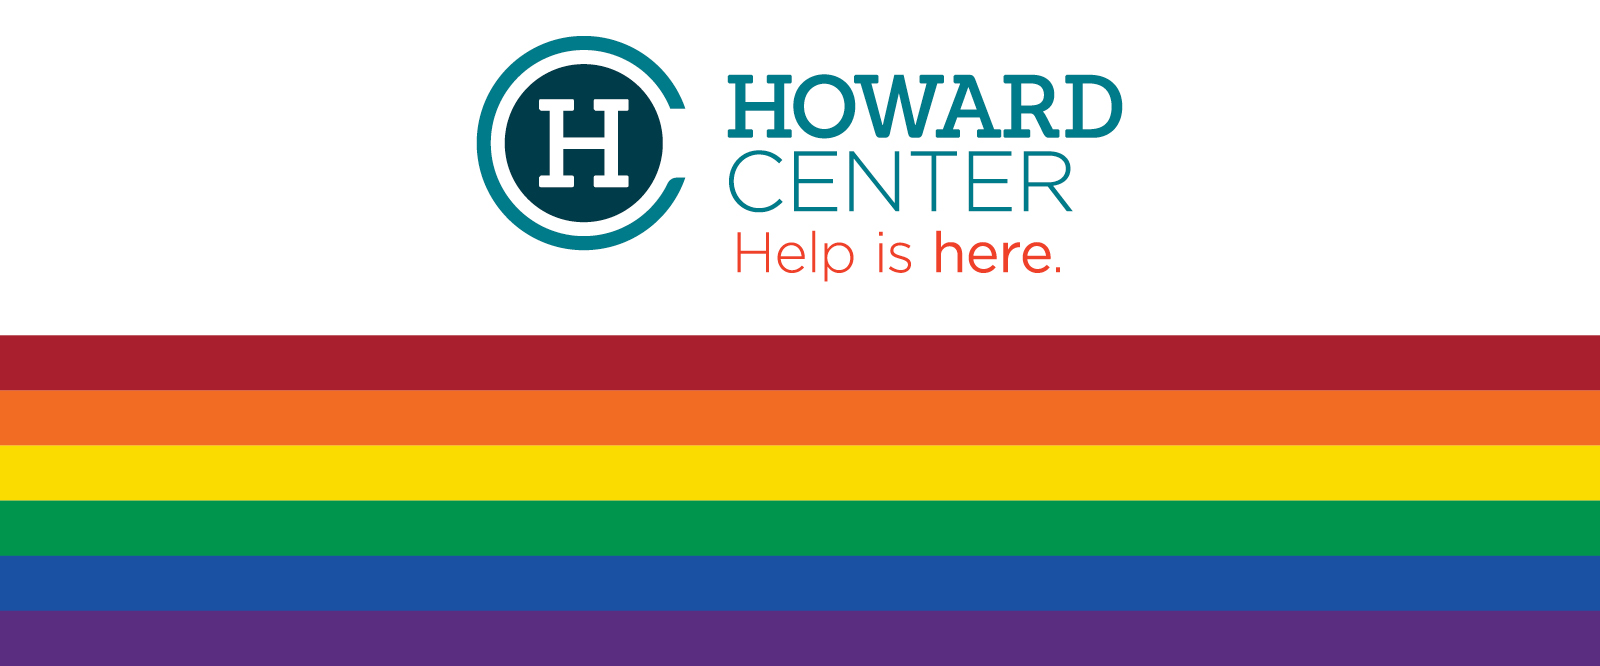 Howard Center - Help is Here